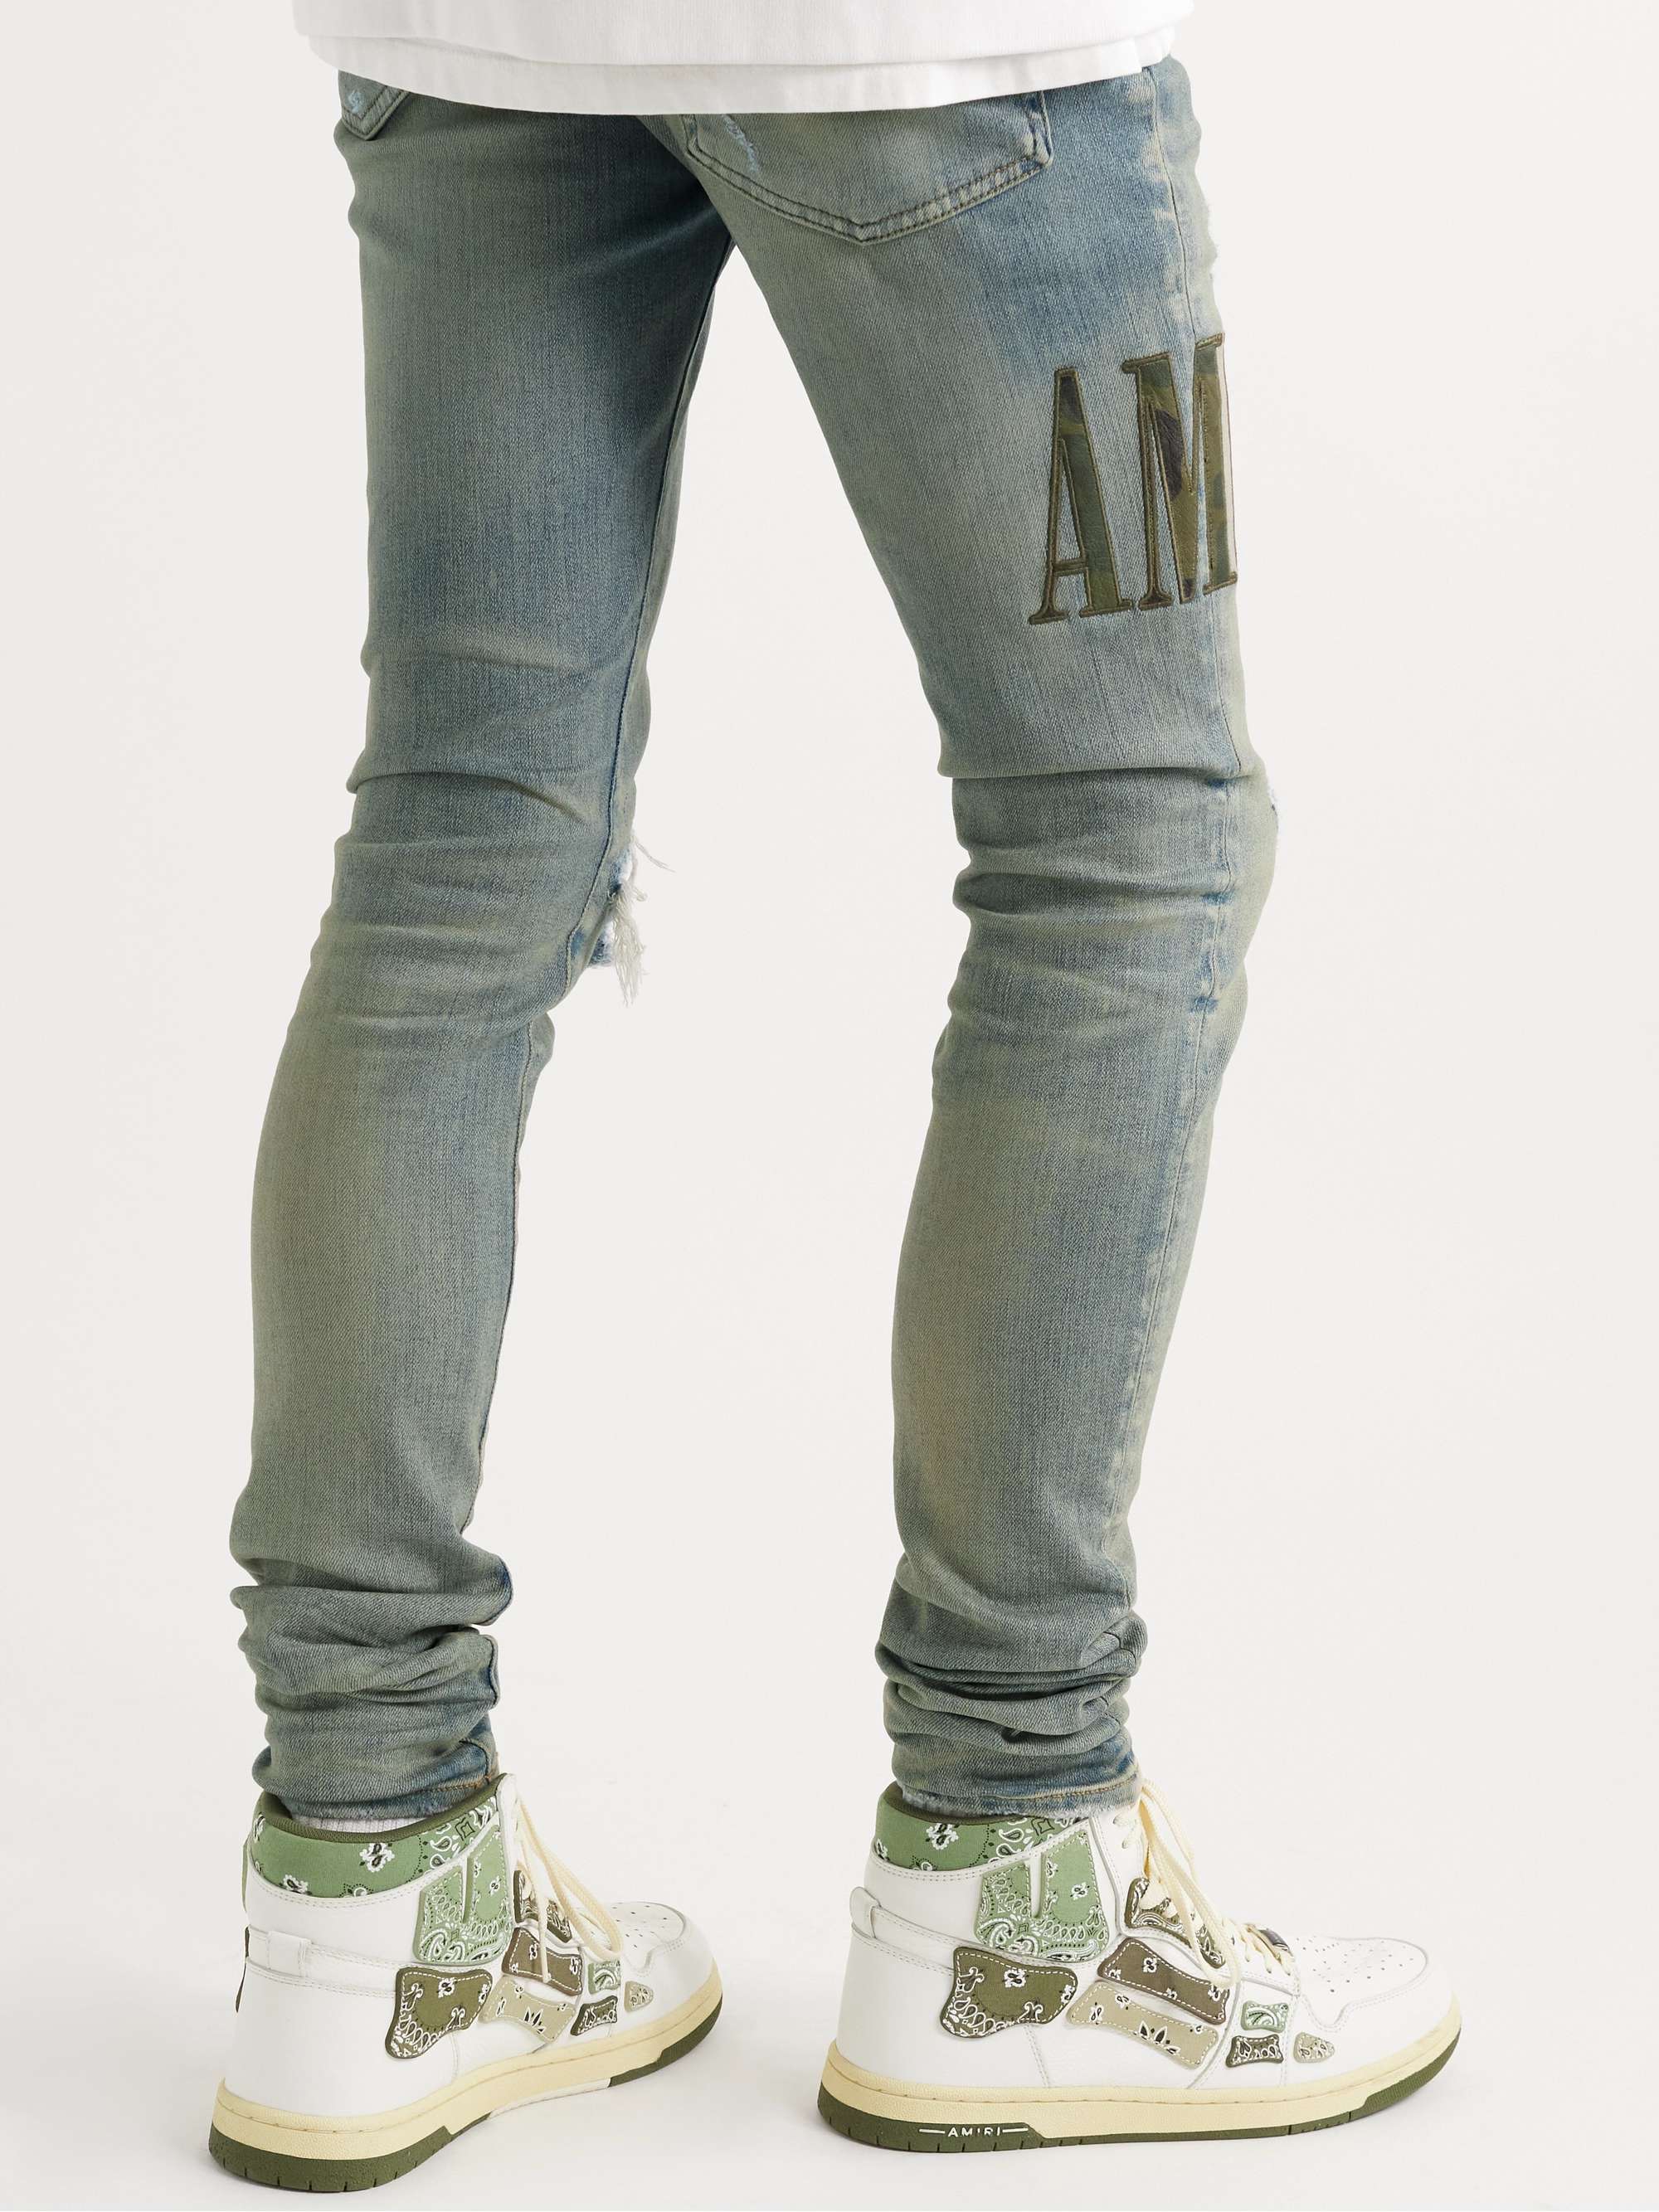 AMIRI Skinny-Fit Leather-Trimmed Distressed Jeans